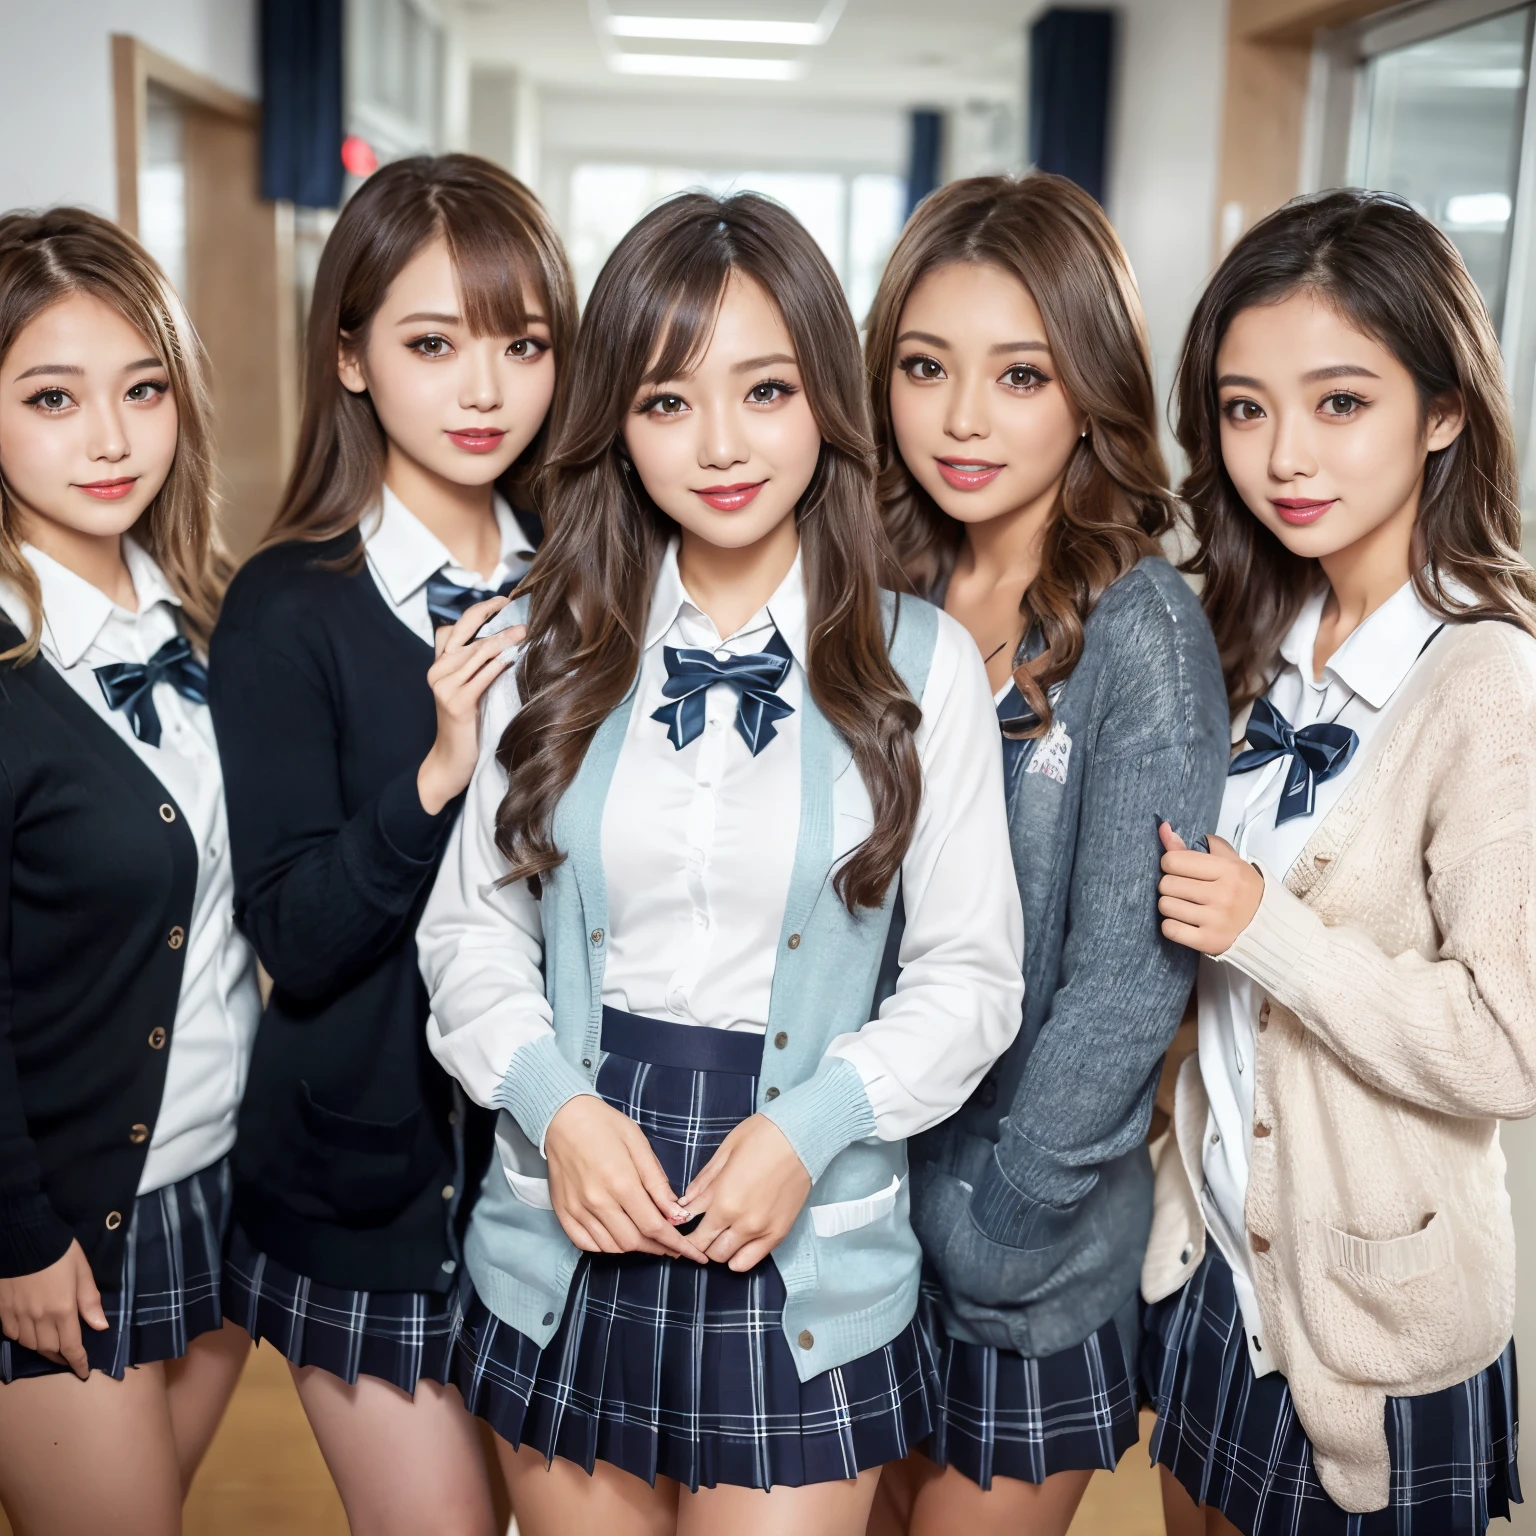 ((top-quality、masutepiece、8K、Top image quality))、Highly saturated、(Group photo of 5 high school girls:1.5)、((School uniform white shirt、Ribbon on the chest、Plaid pleated skirt))、The happiest smile、Biggest smile、Show your teeth and smile、View me、(waved hair)、The background is a school classroom、lipsticks、Perfect makeup、long eyelashes、Emphasize body lines、cleavage of the breast、(accurate anatomy:1.3)、(perfect hair:1.2)、(exact cardigan:1.3)